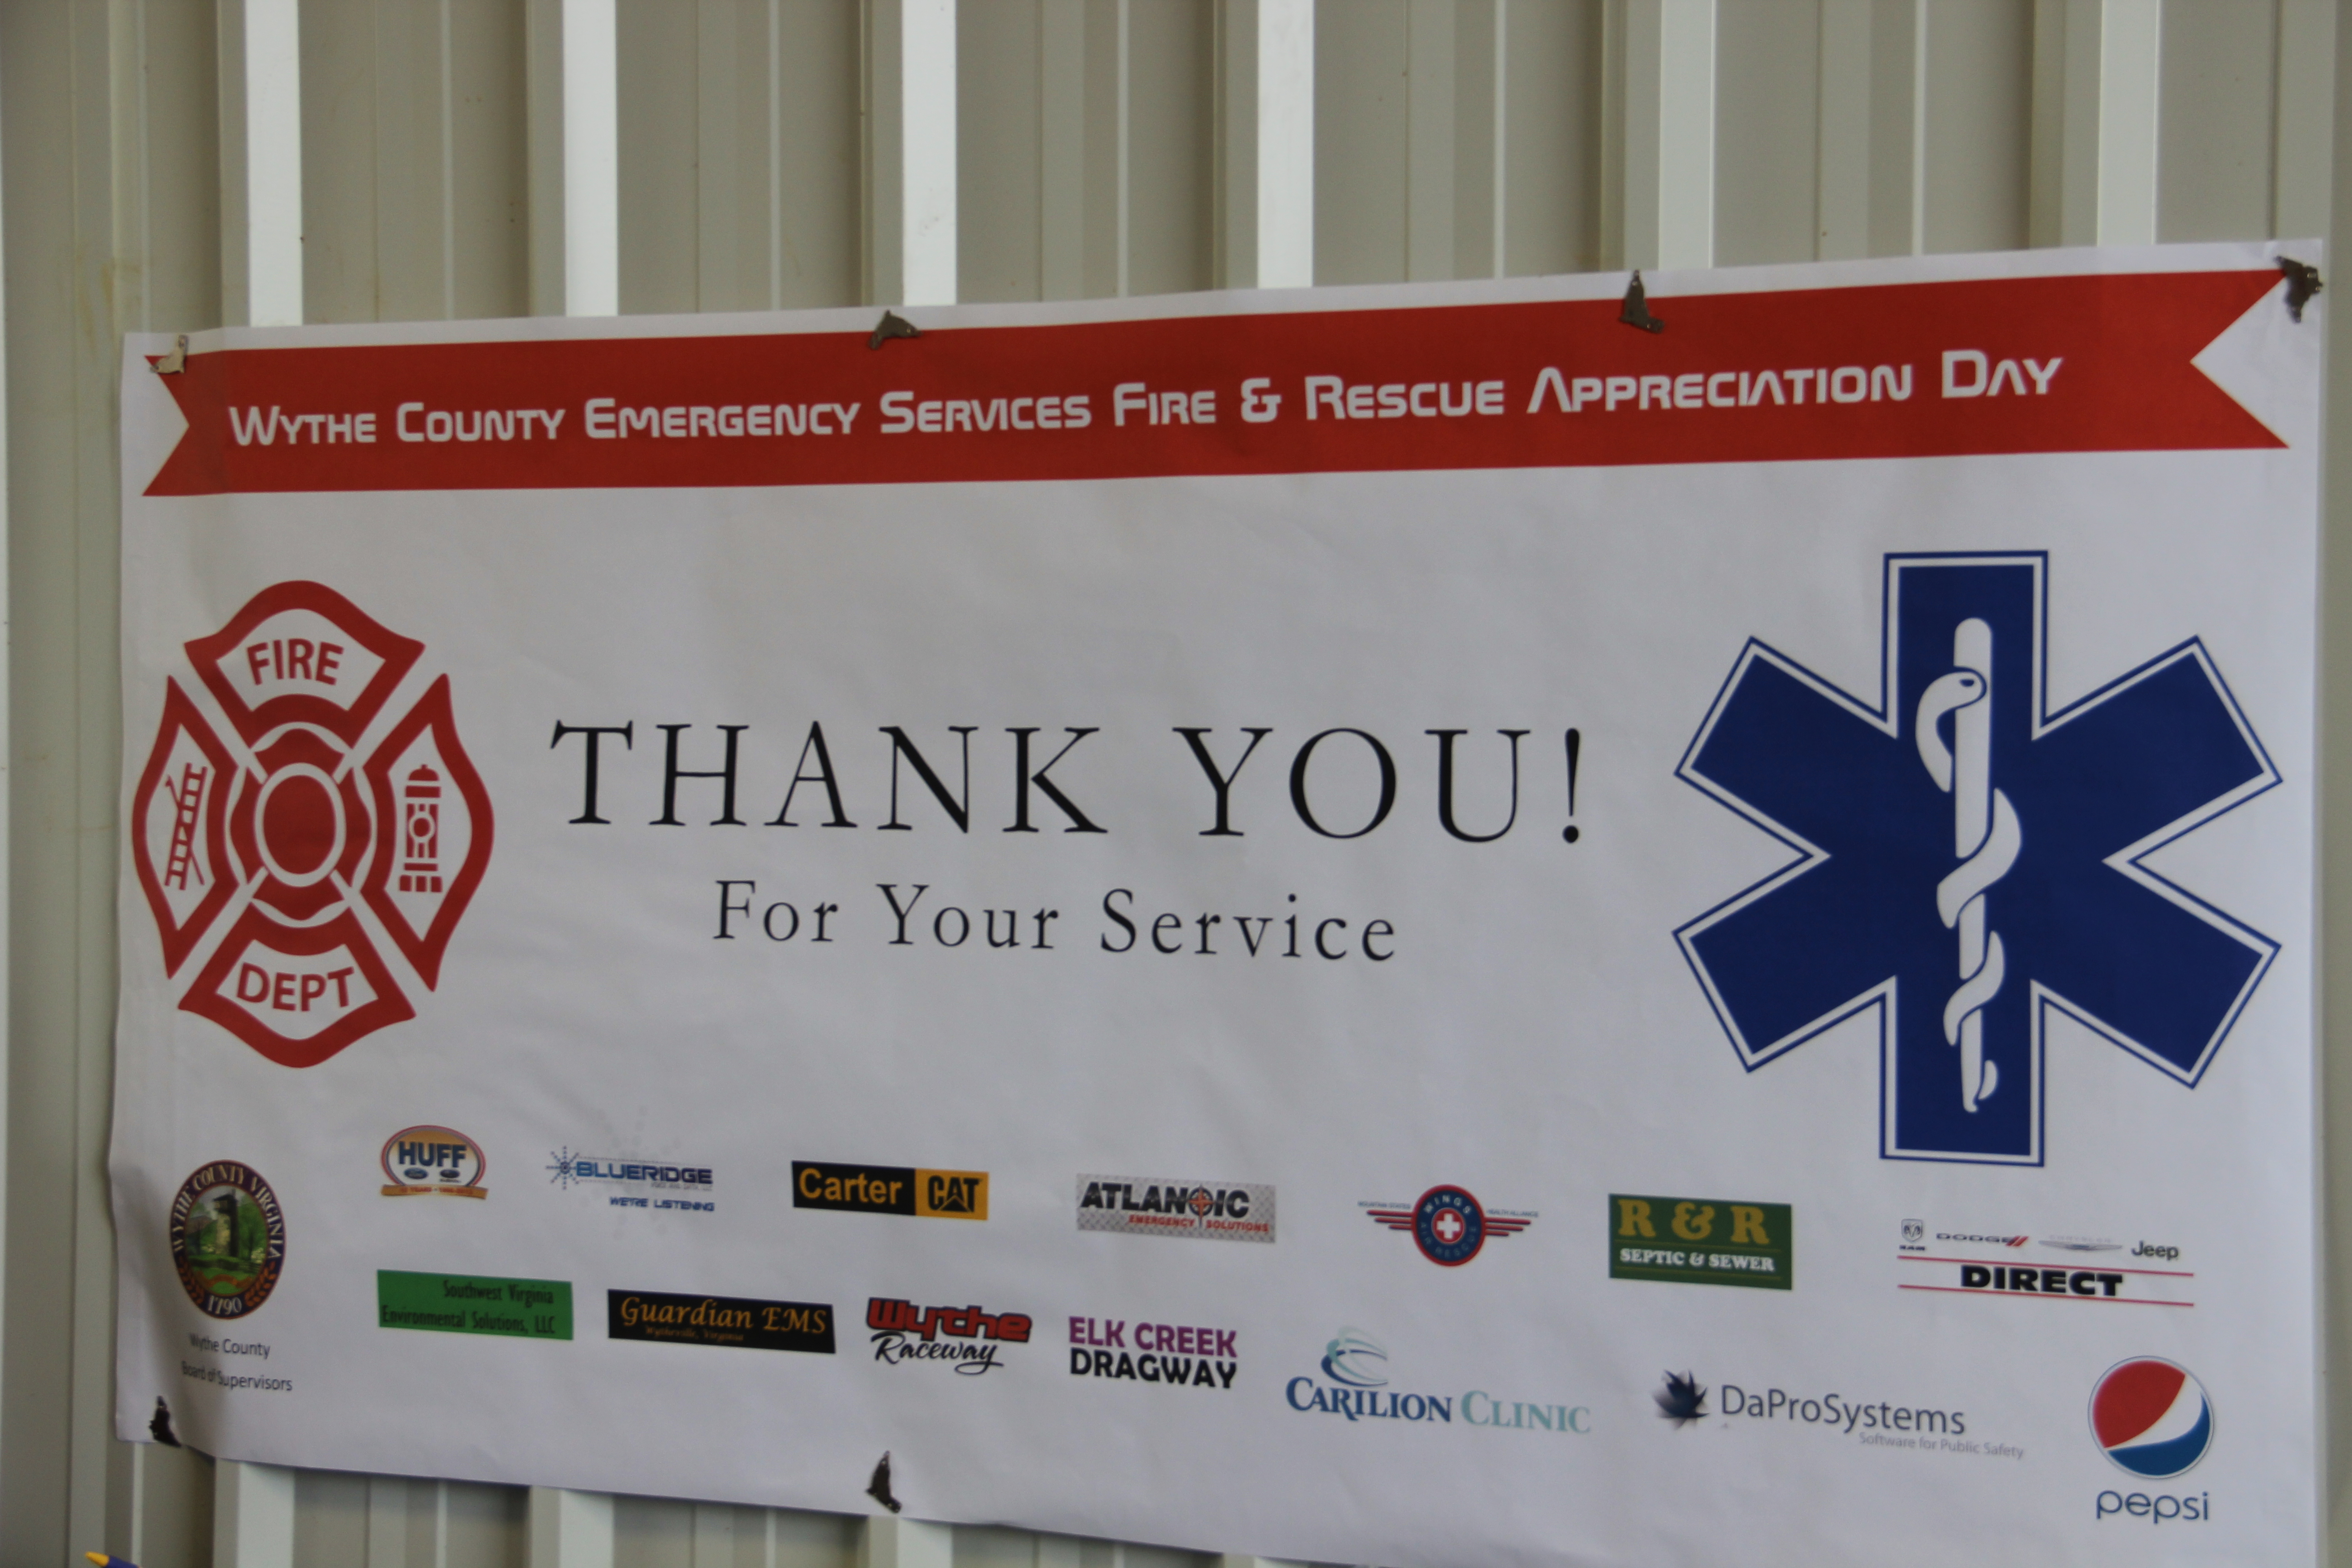 Wythe County Hosts Emergency Services Fire & Rescue Appreciation Day